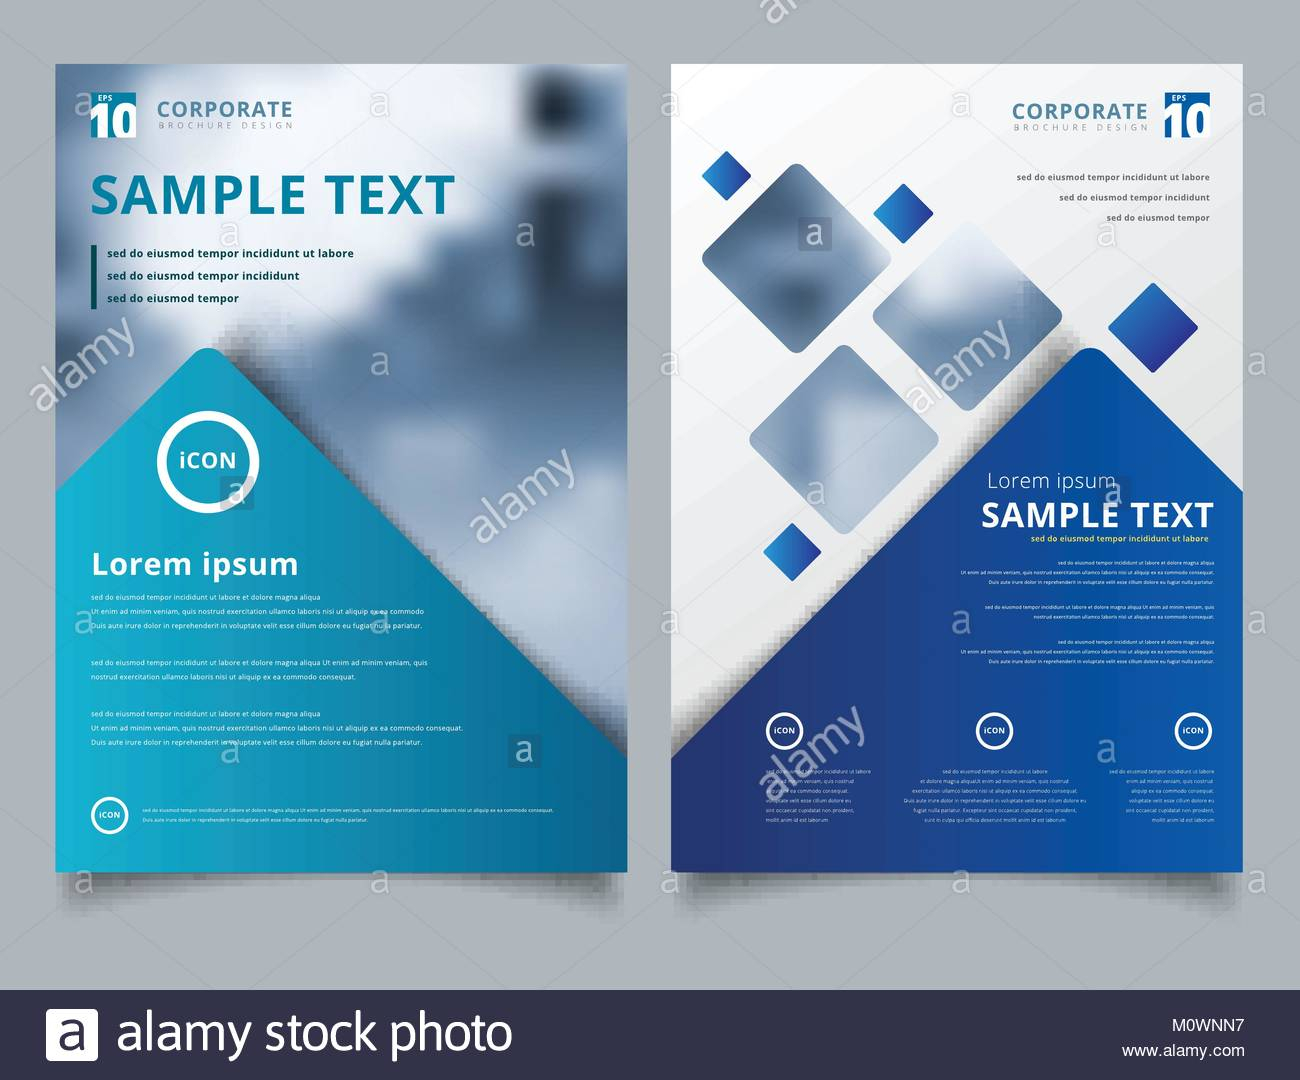 Free Poster Design Templates Illustrator With Scientific Intended For Illustrator Brochure Templates Free Download